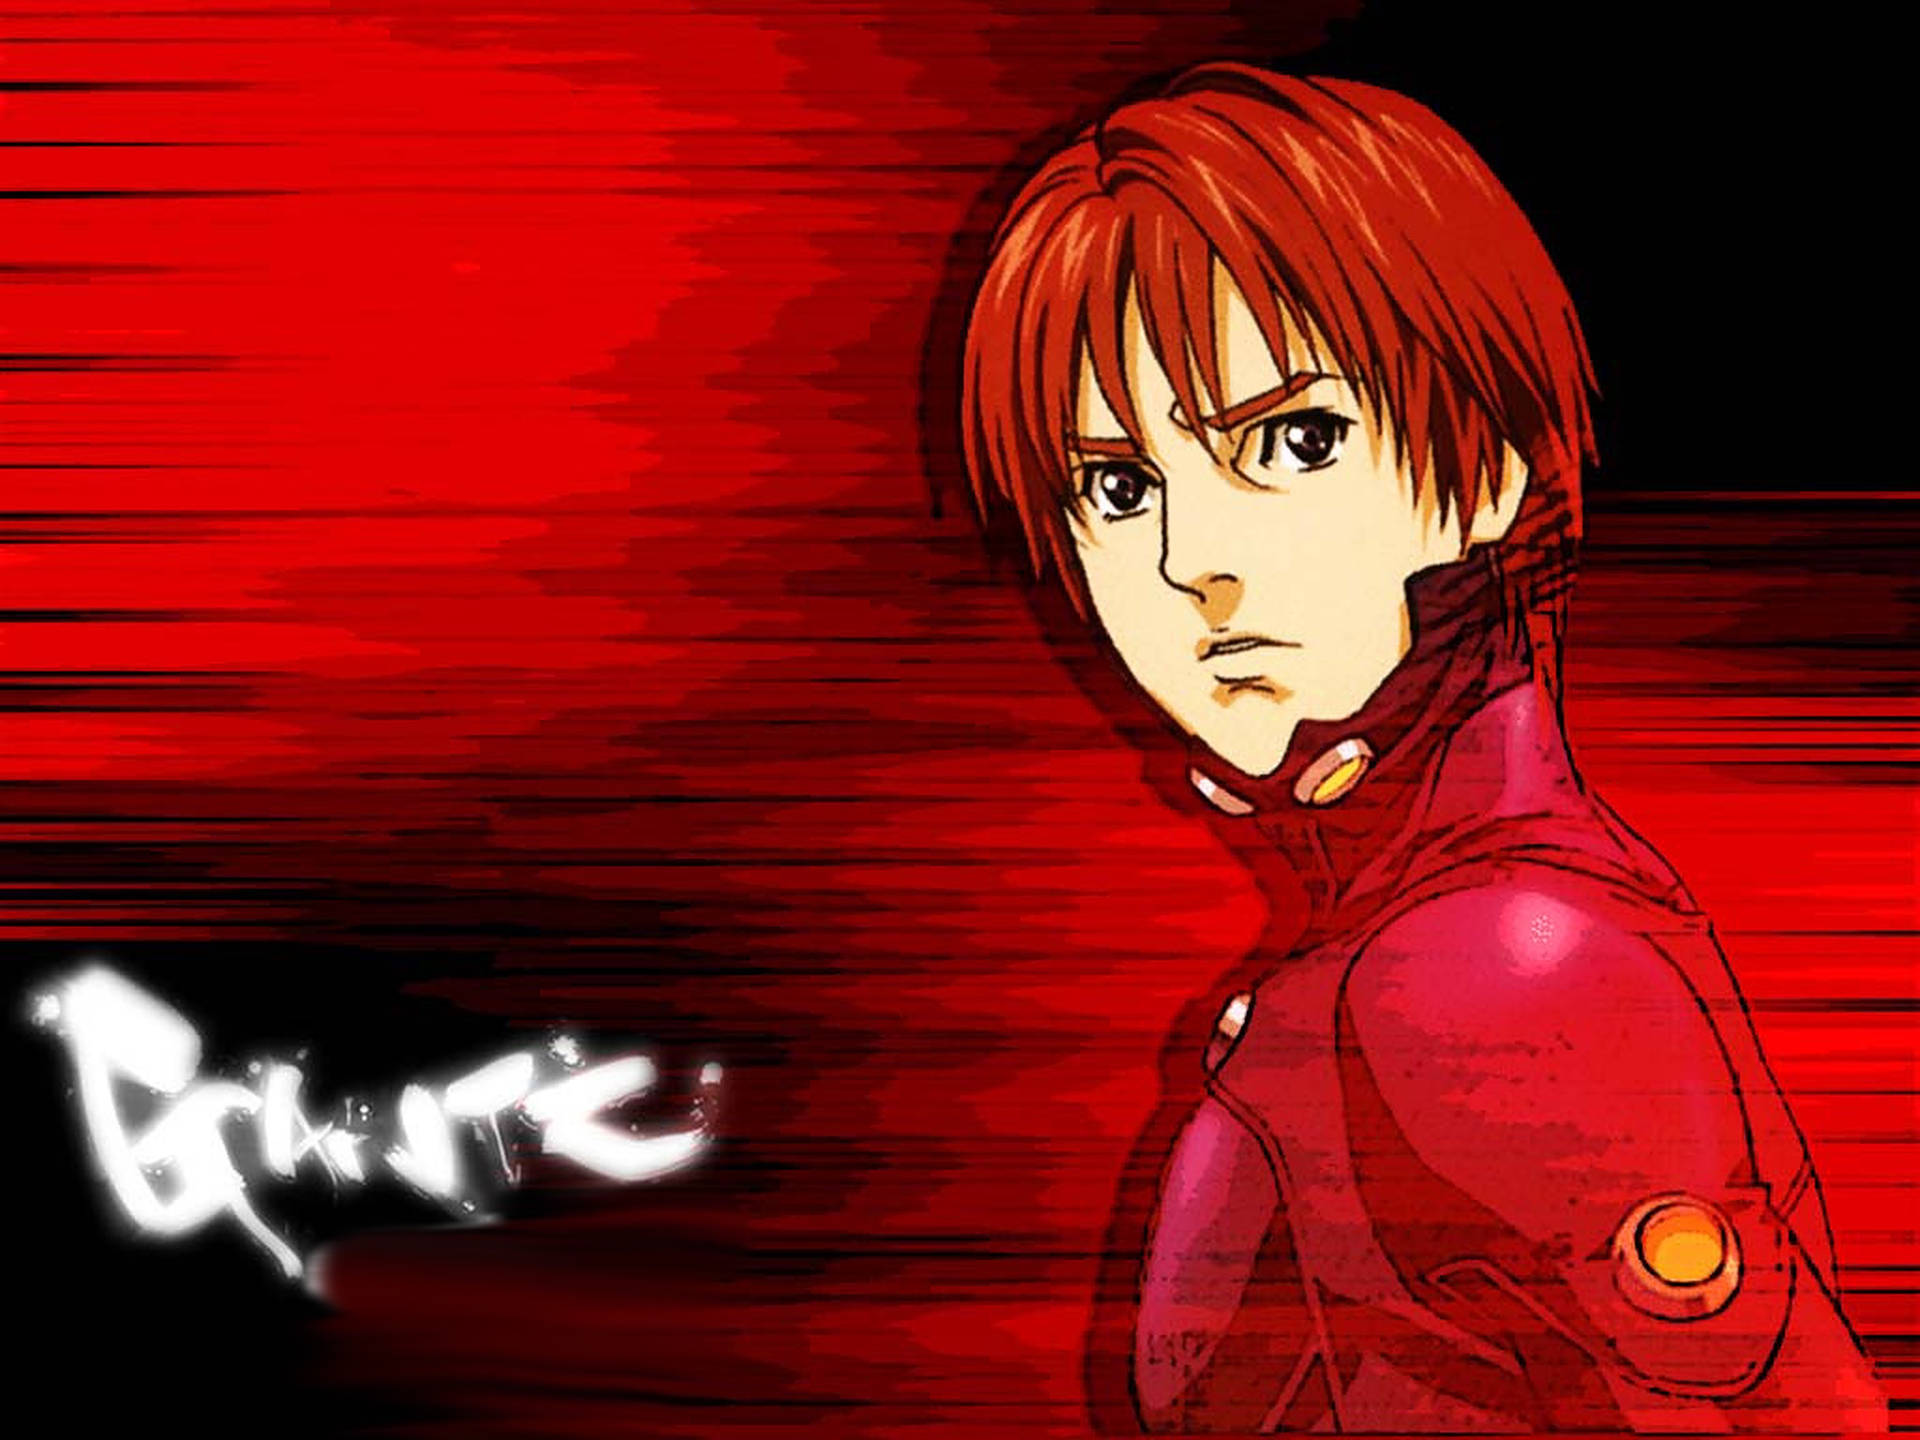 Caption: The Stoic Kei Kurono From Gantz In An Intense Red Poster Background